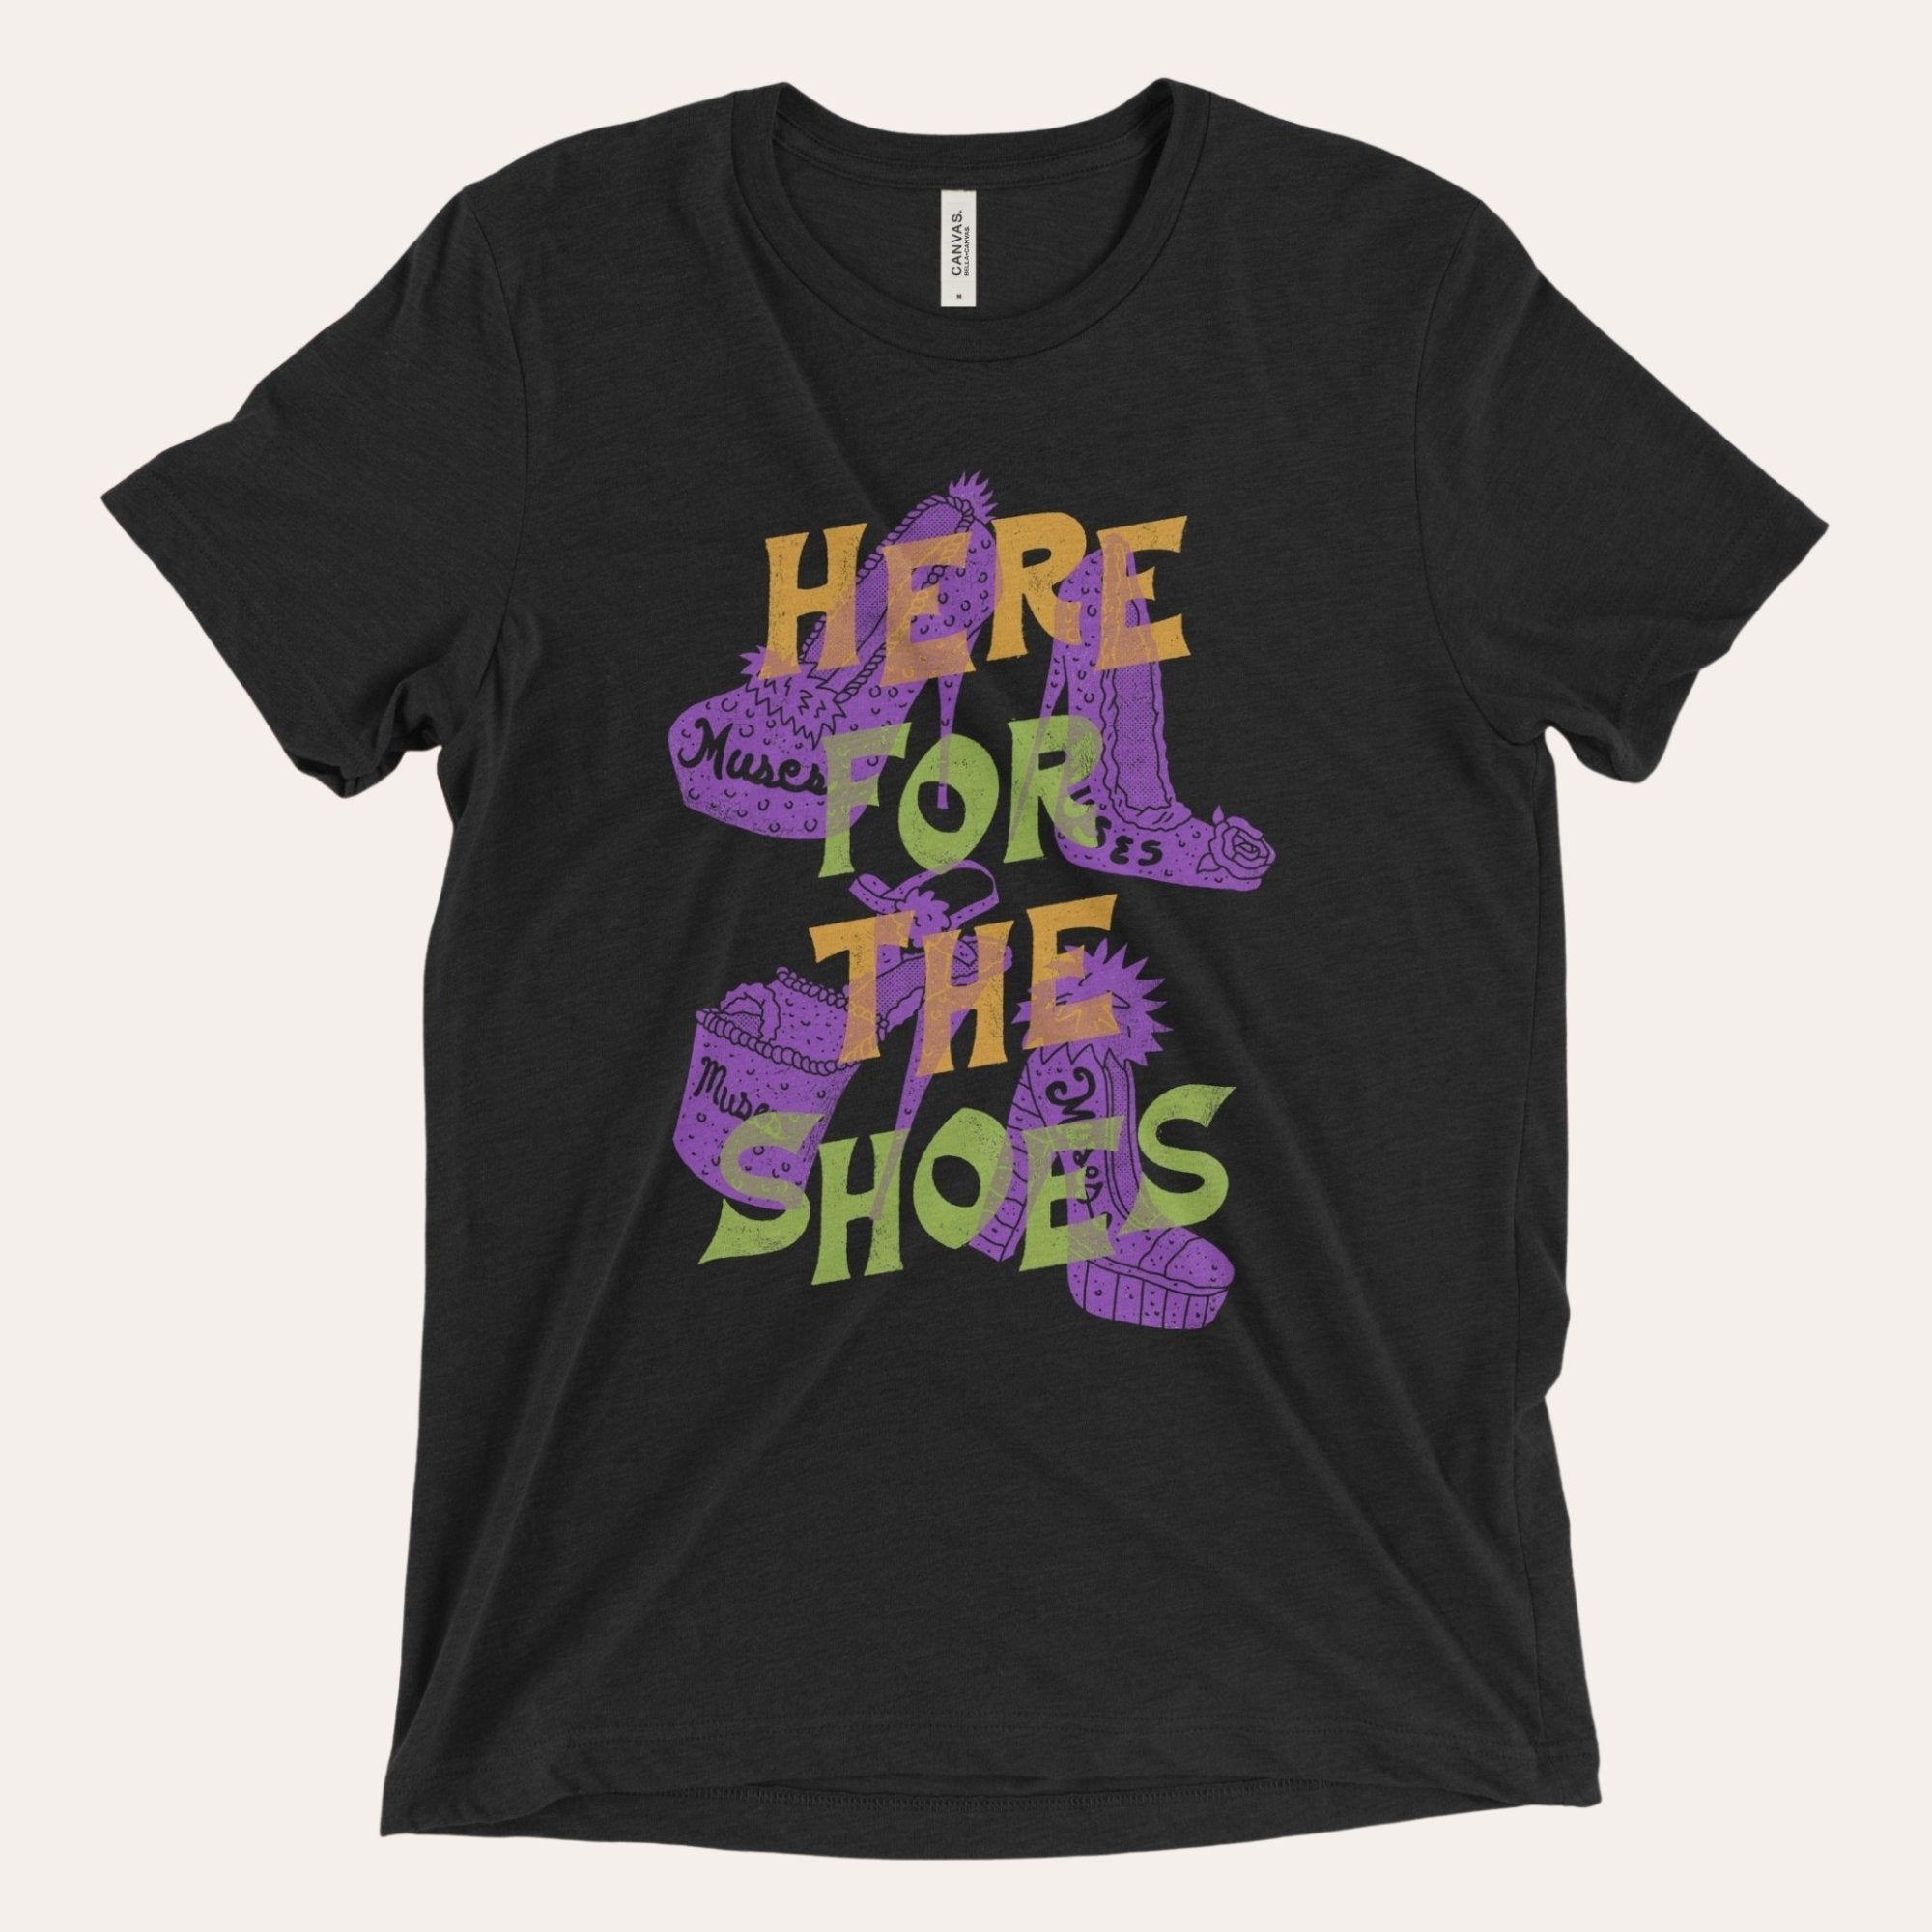 Here For The Shoes - Dirty Coast Press